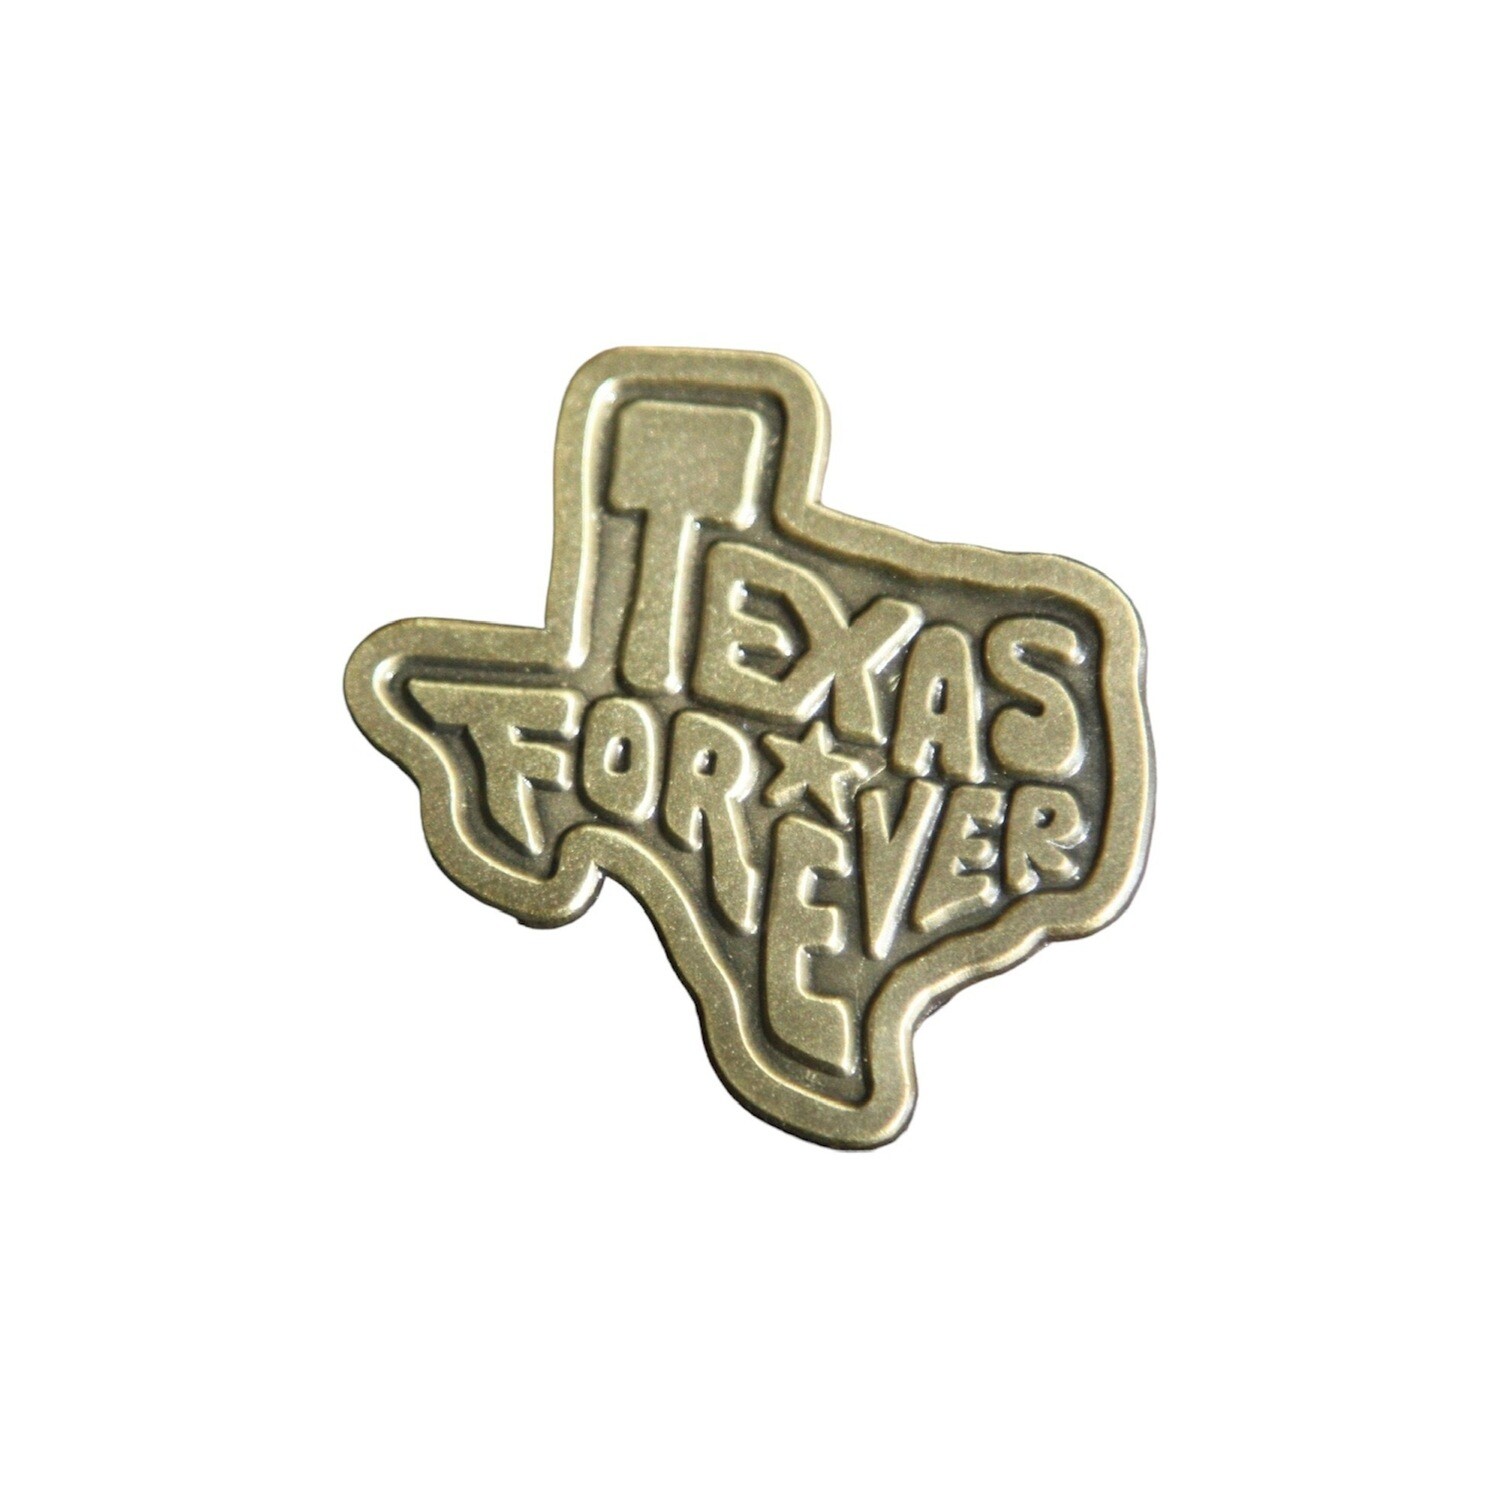 Texas Forever Gold Pin